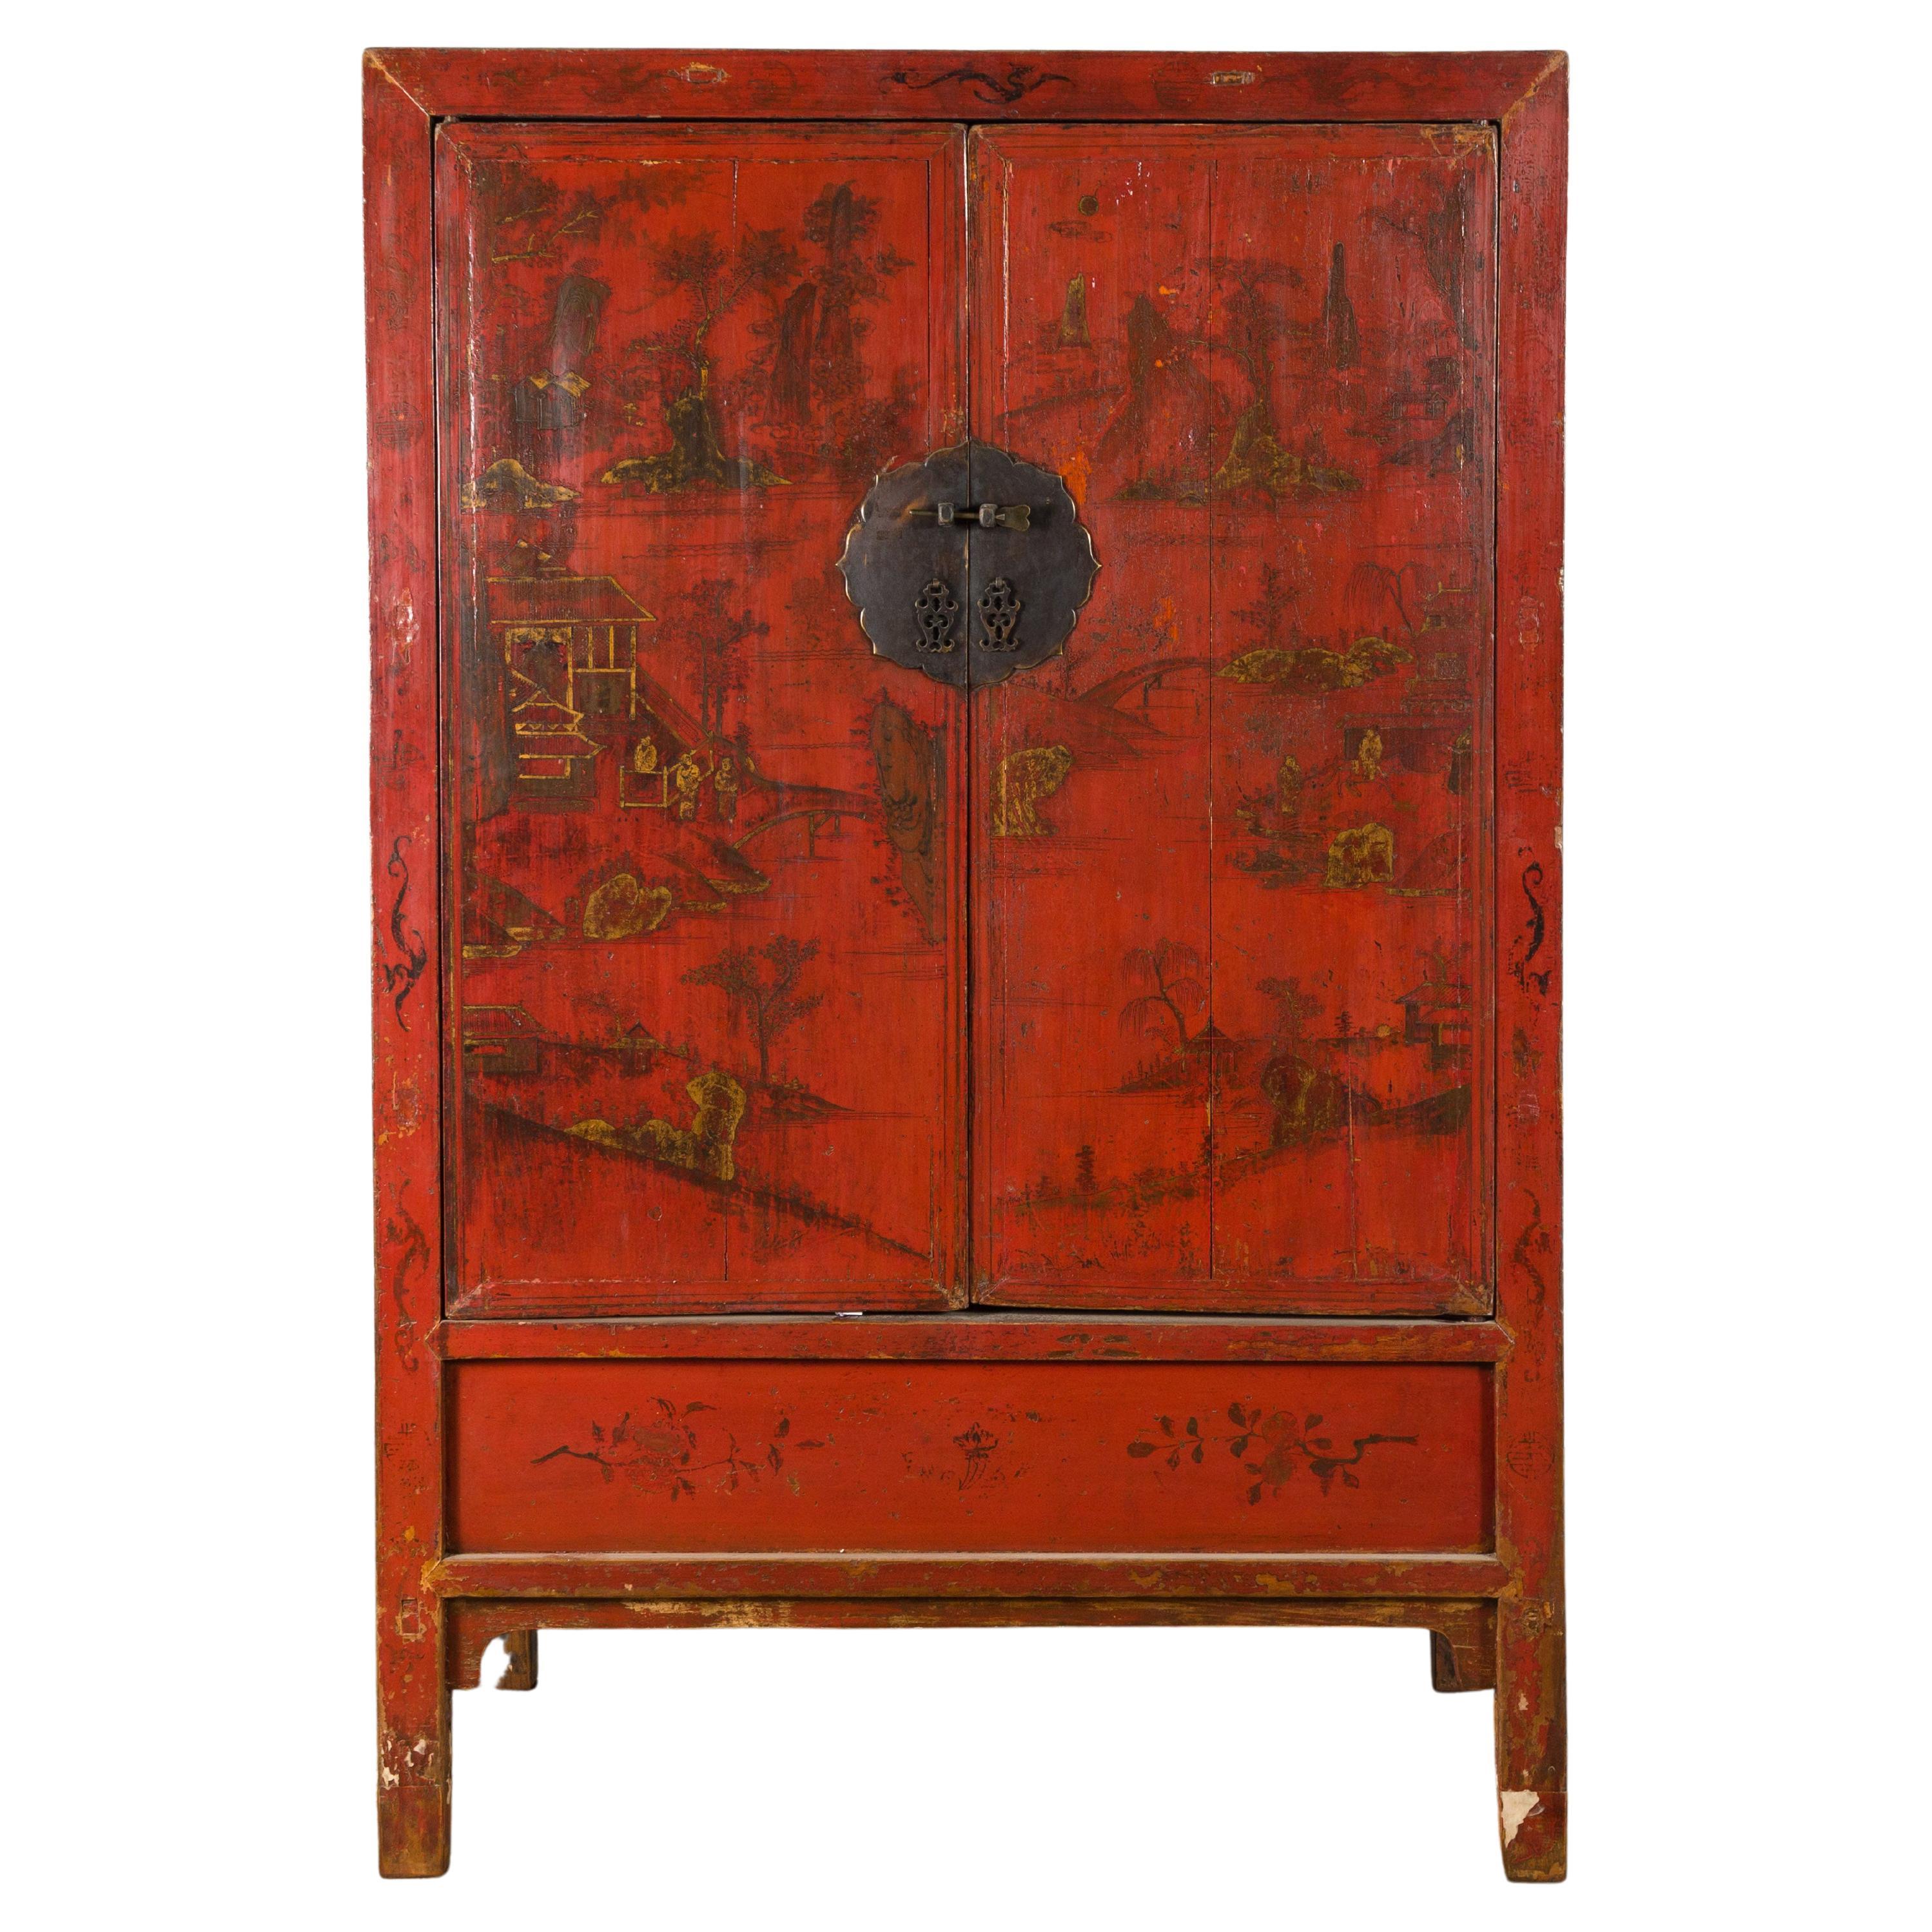 A Chinese Qing Dynasty period cabinet from the 19th century, with original red lacquer and hand-painted gilt décor. Created in China during the Qing Dynasty period in the 19th century, this cabinet features its original red lacquer, a perfect ground